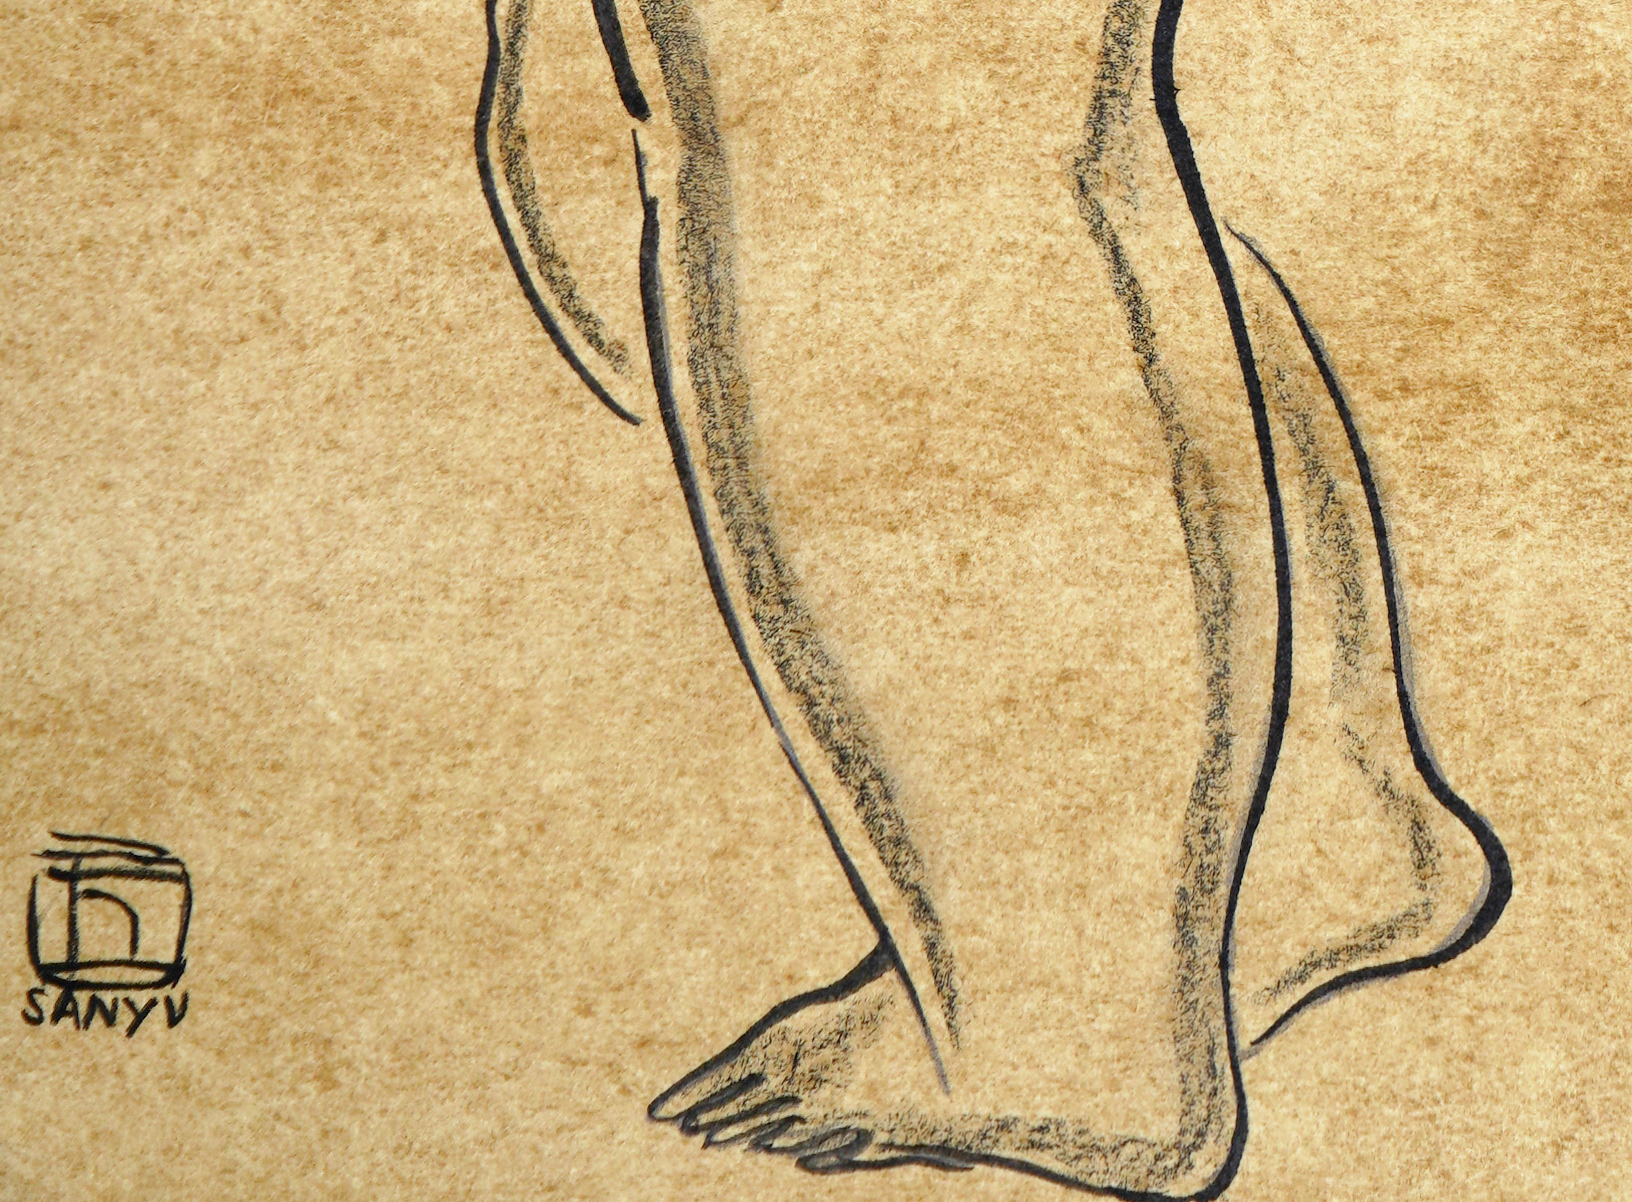 Sanyu (1895-1966), Sketch on Paper - Image 2 of 2